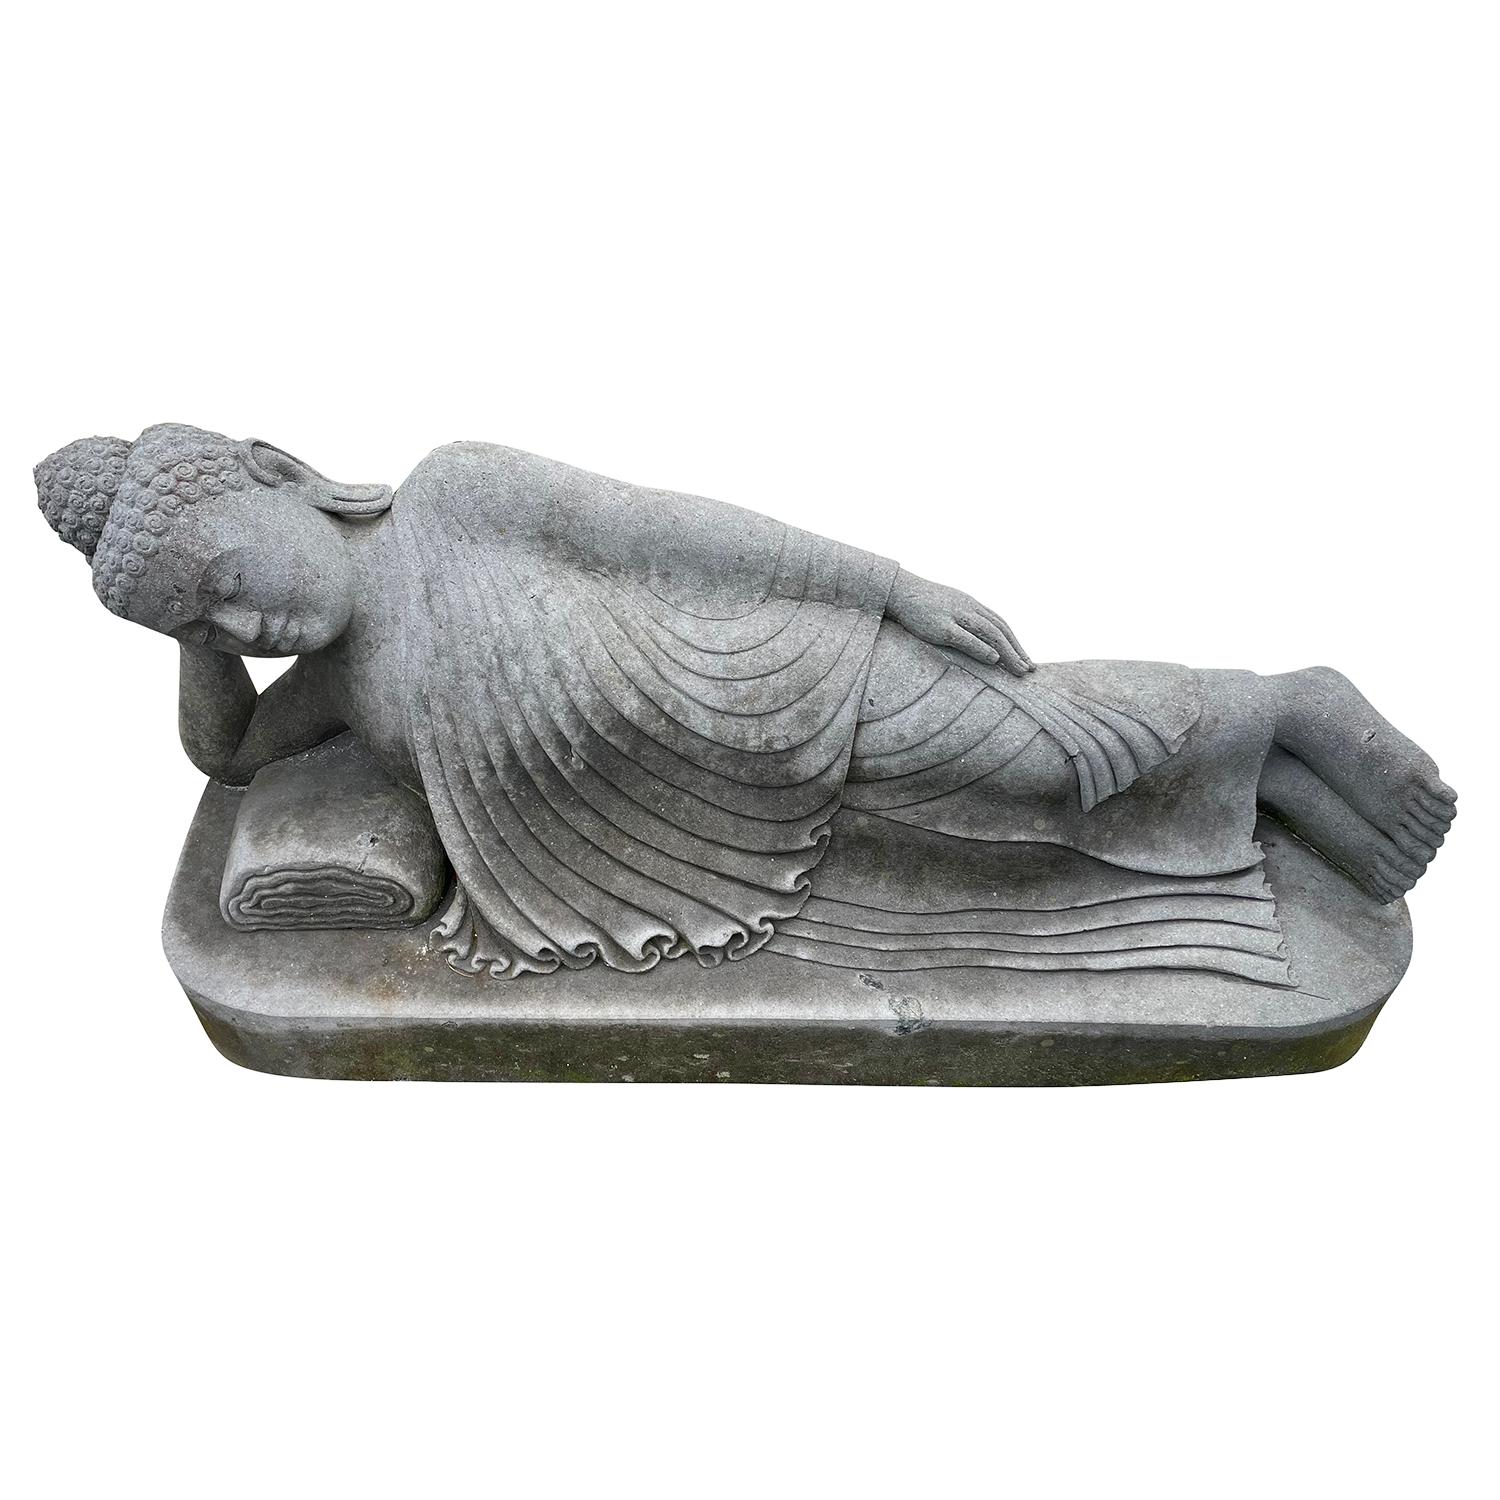 A grey, vintage reclining Buddha statue hand carved in lavastone elevated on simple rectangular base, in good condition. Wear consistent with age and use. Circa 1920 - 1930, Provenance Burma.